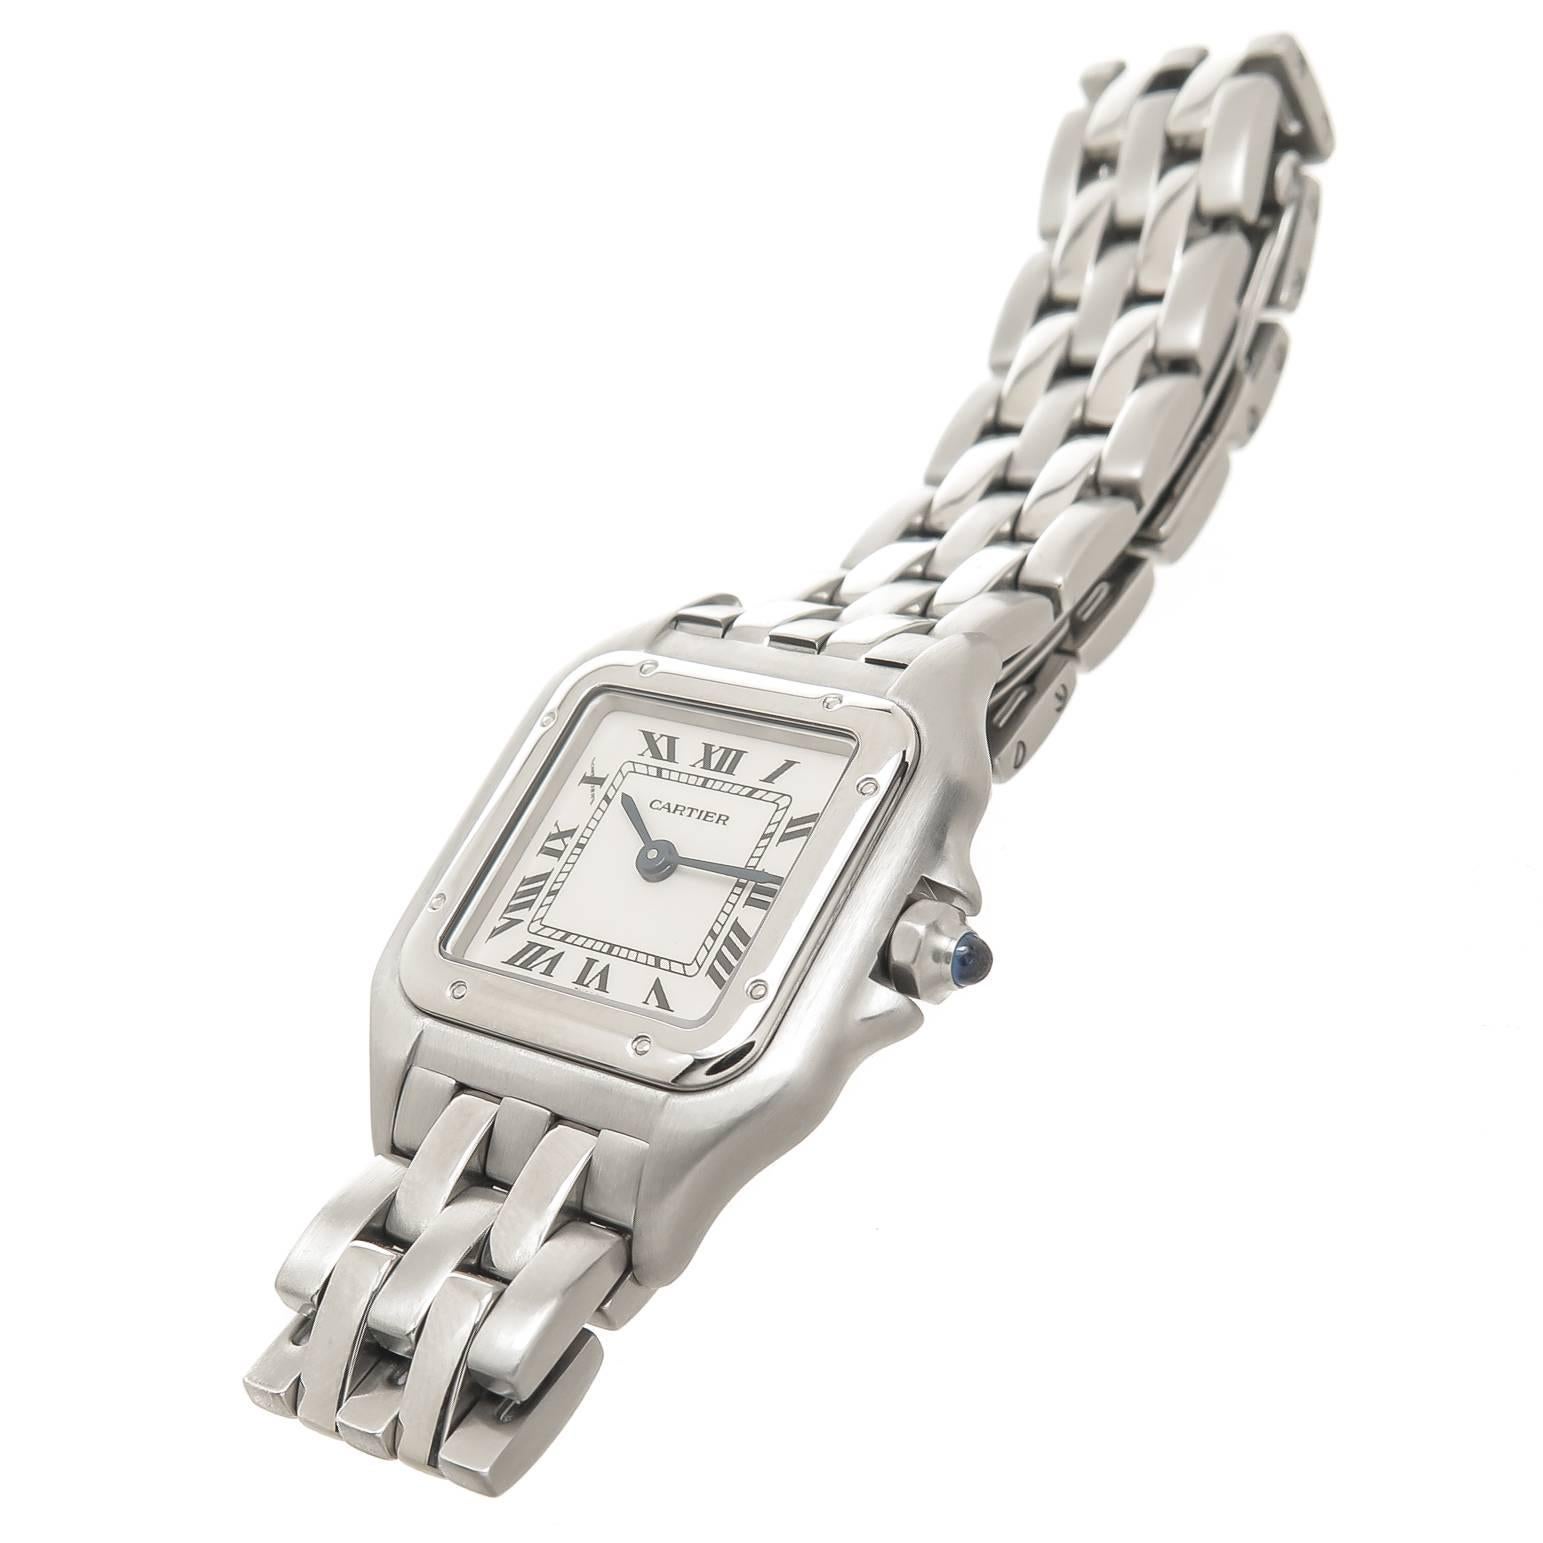 Circa 2000 Cartier Panther Collection Ladies Wrist Watch, 30 X 22 MM Stainless Steel Water resistant Case, Quartz Movement, Silvered Dial with Black Roman Numerals. 1/2 inch wide Steel Panther Bracelet with Deployment buckle. Total Length 6 inches.